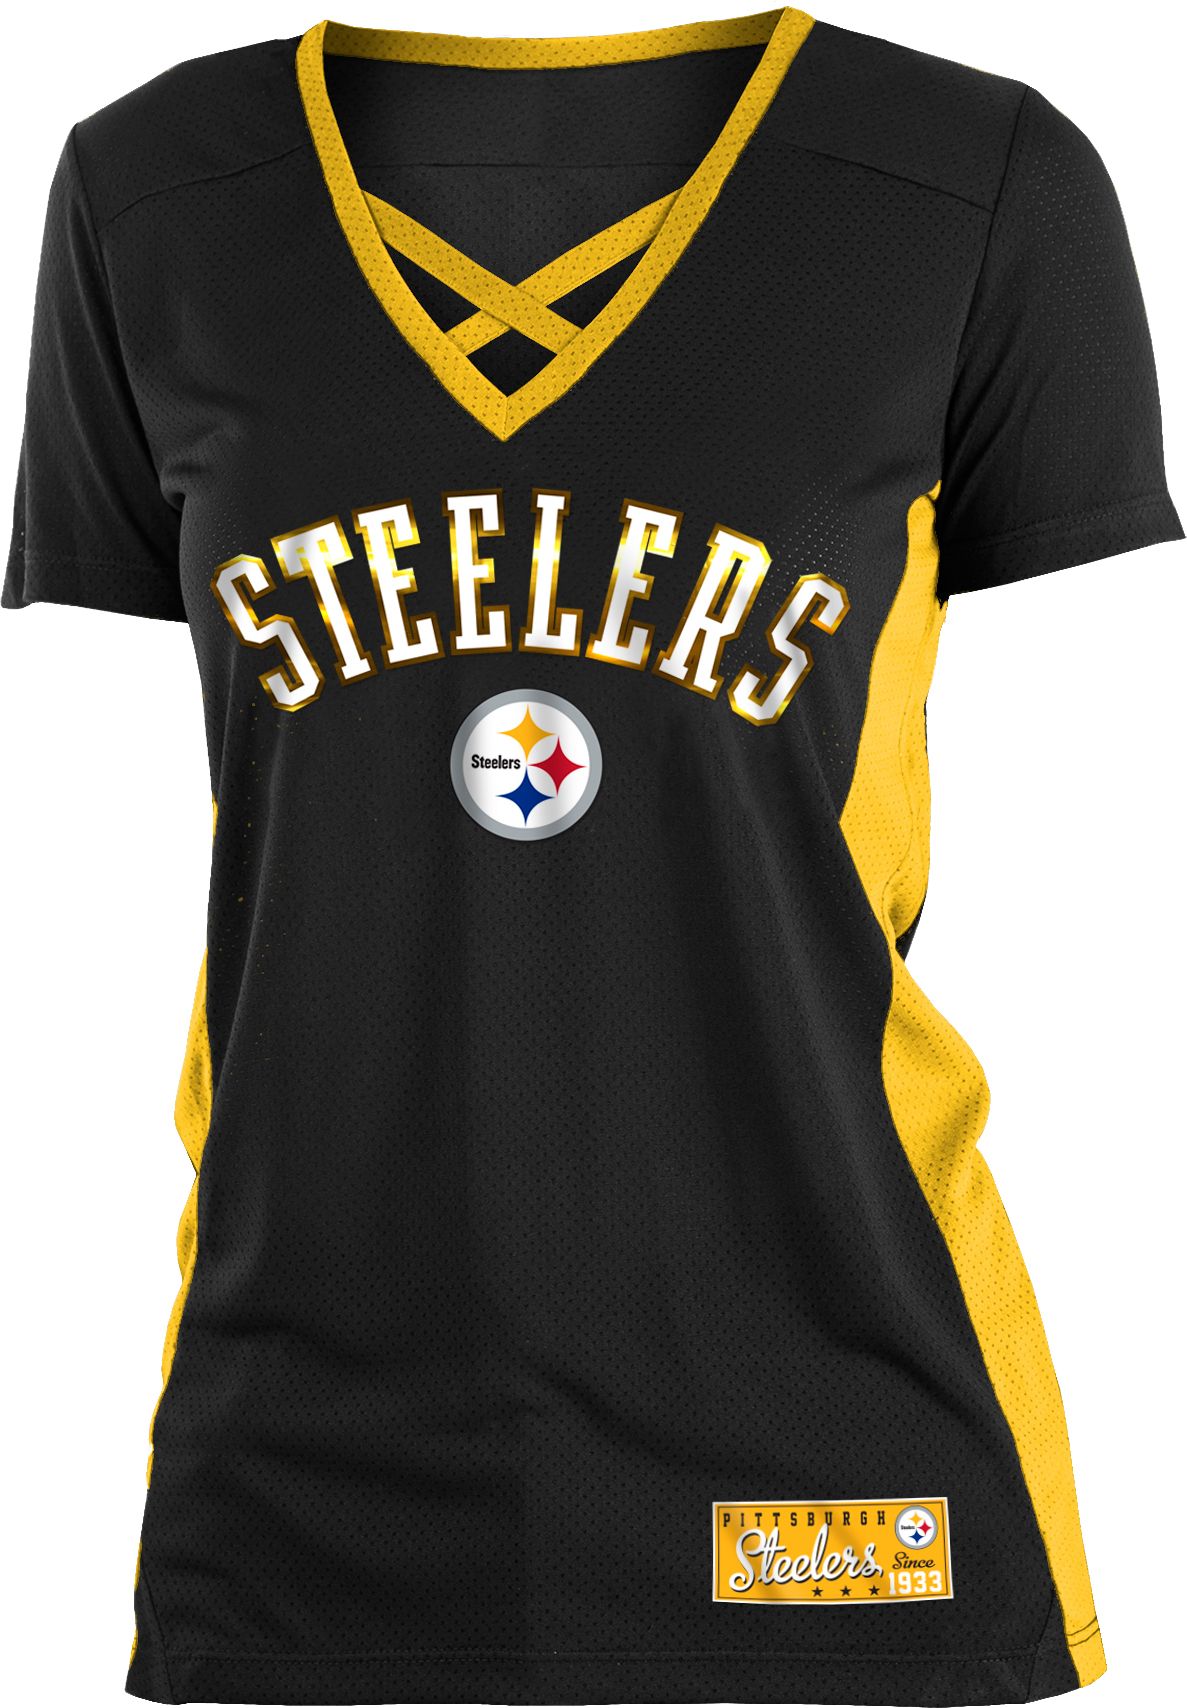 different steelers jerseys